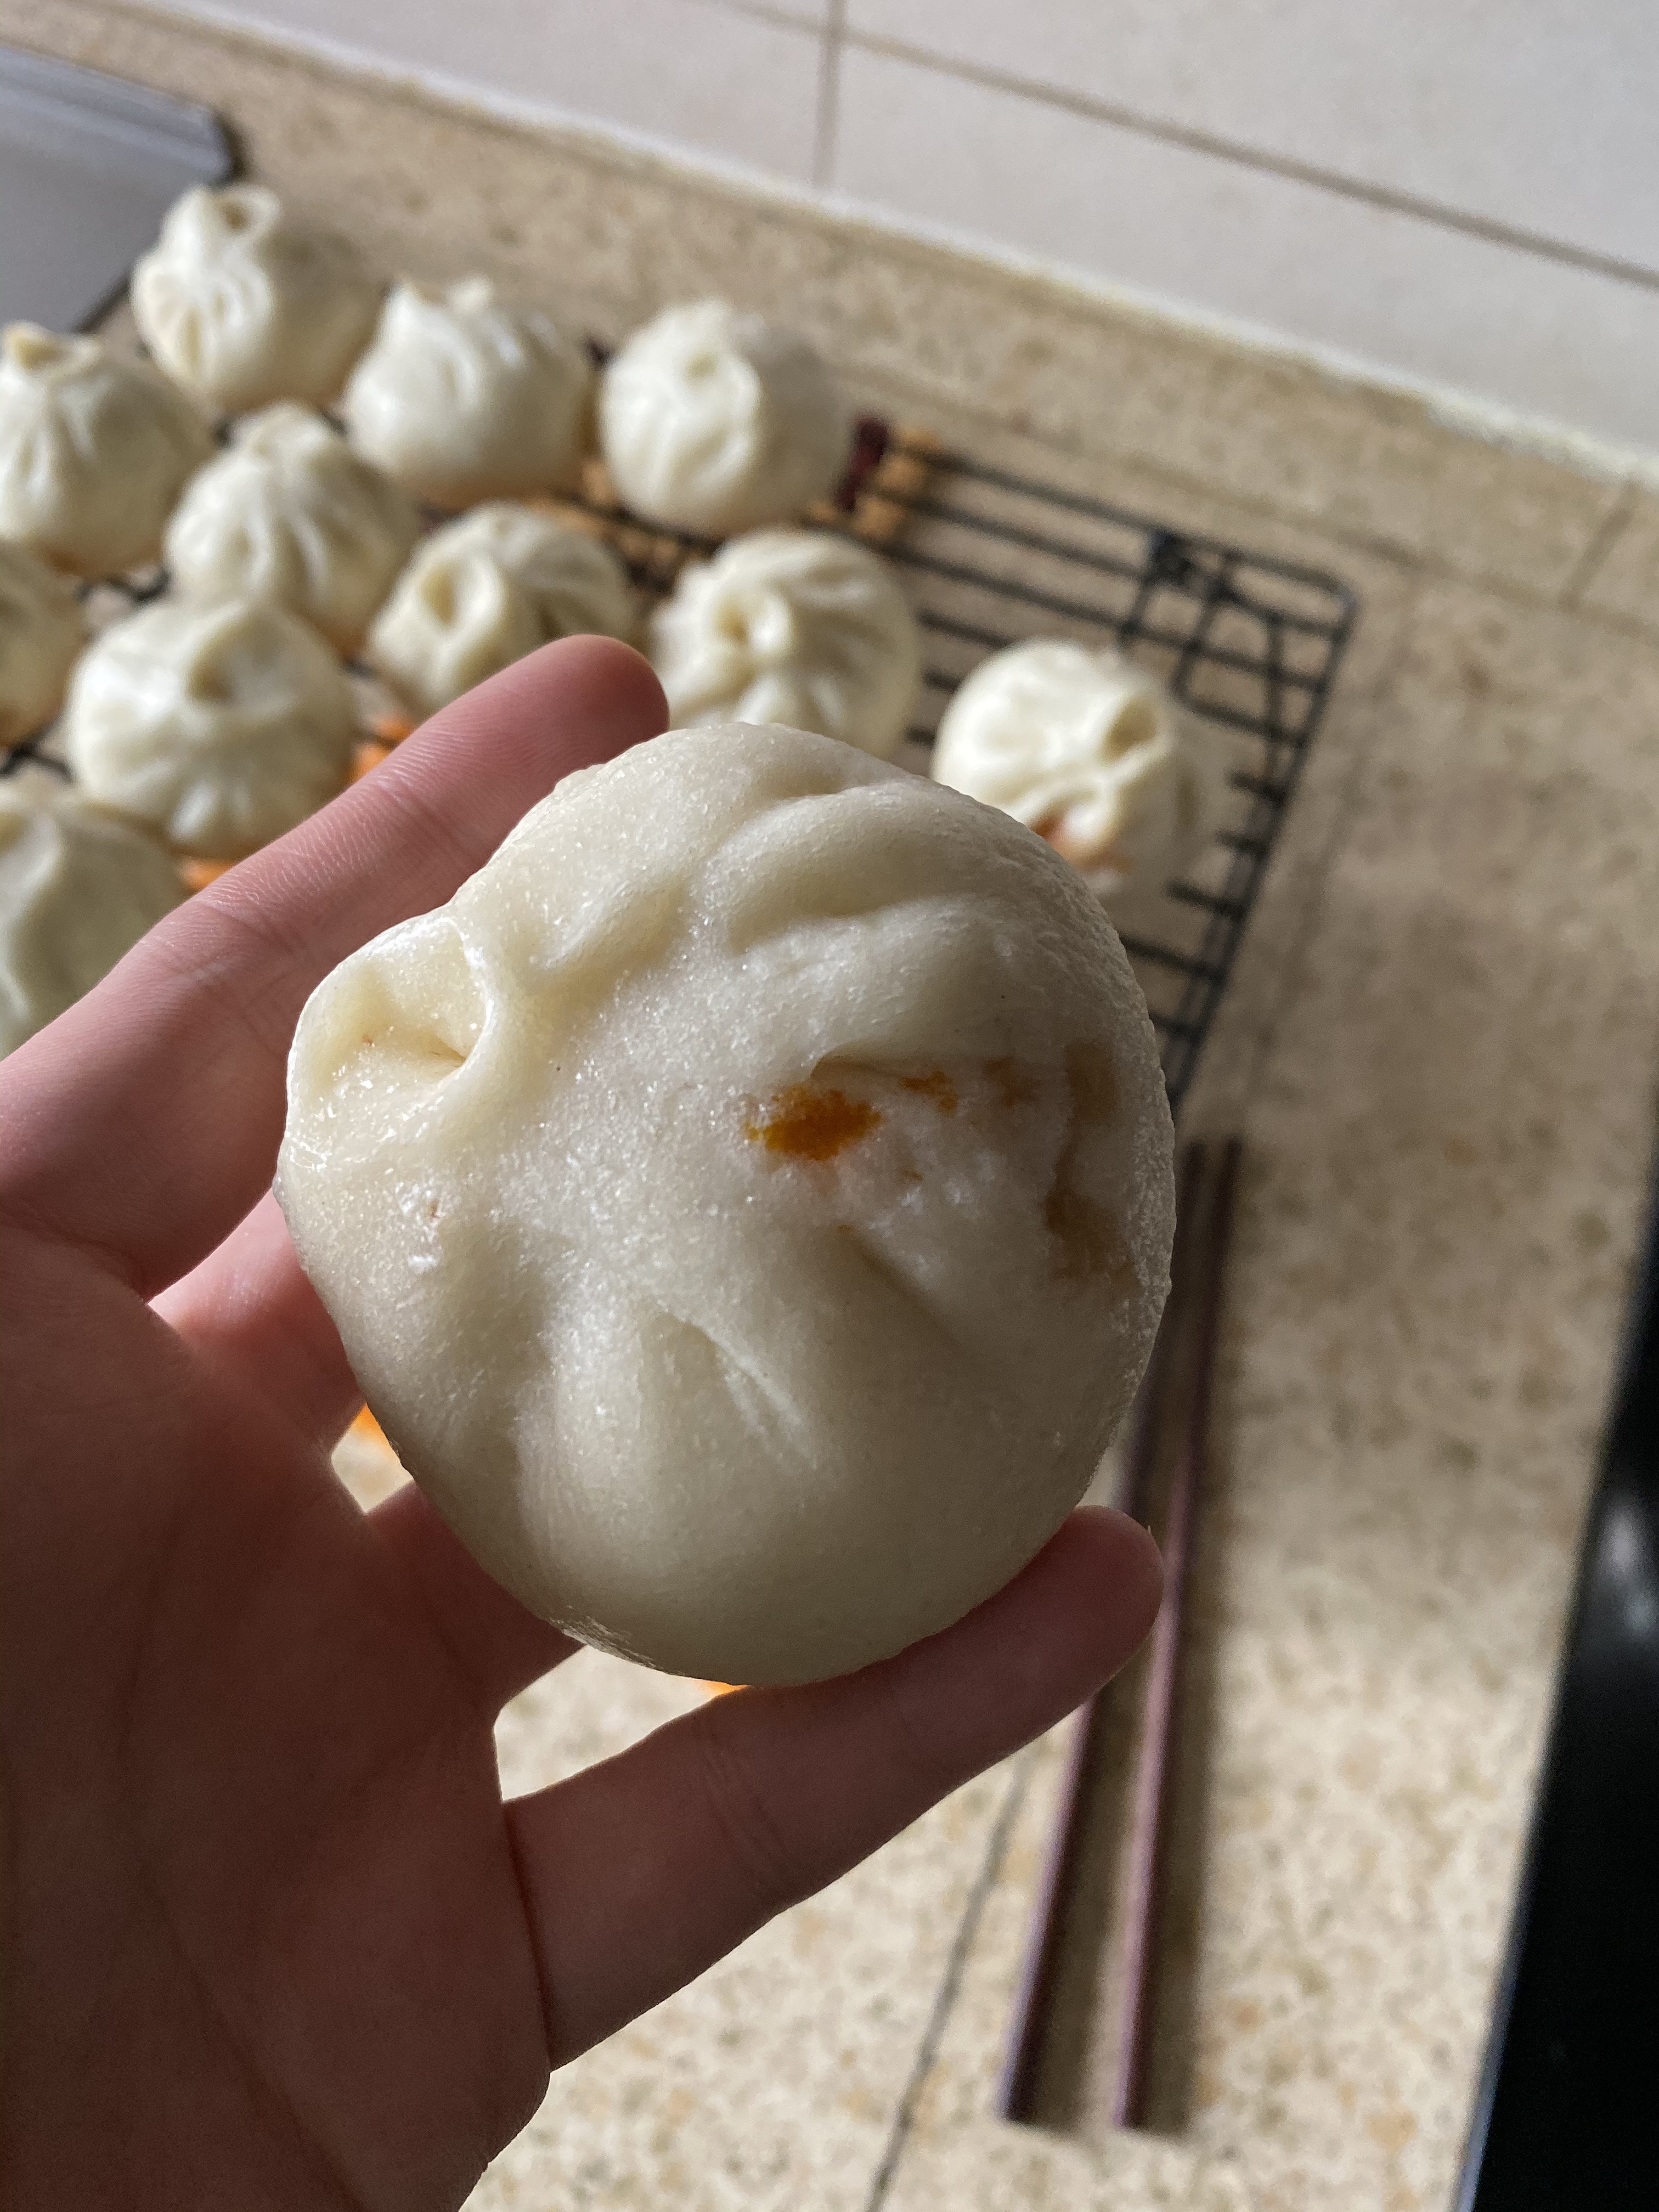 
The practice of beef steamed stuffed bun, how is beef steamed stuffed bun done delicious